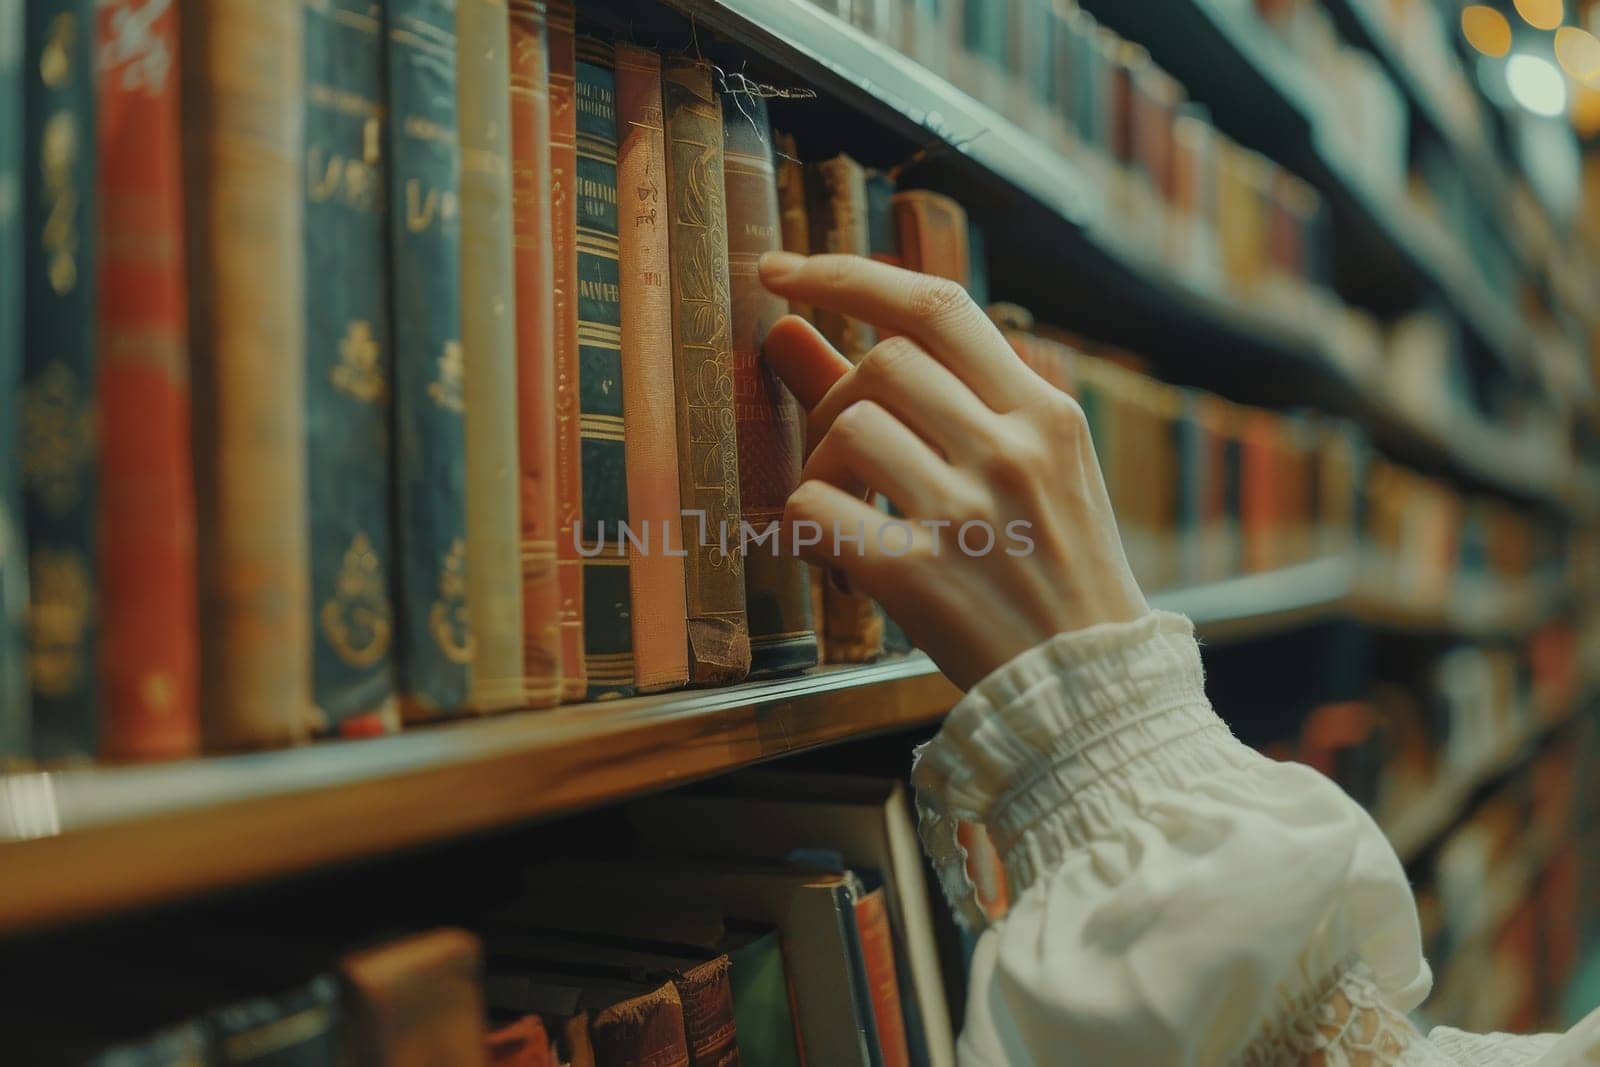 A person is reaching for a book on a shelf in a library by itchaznong